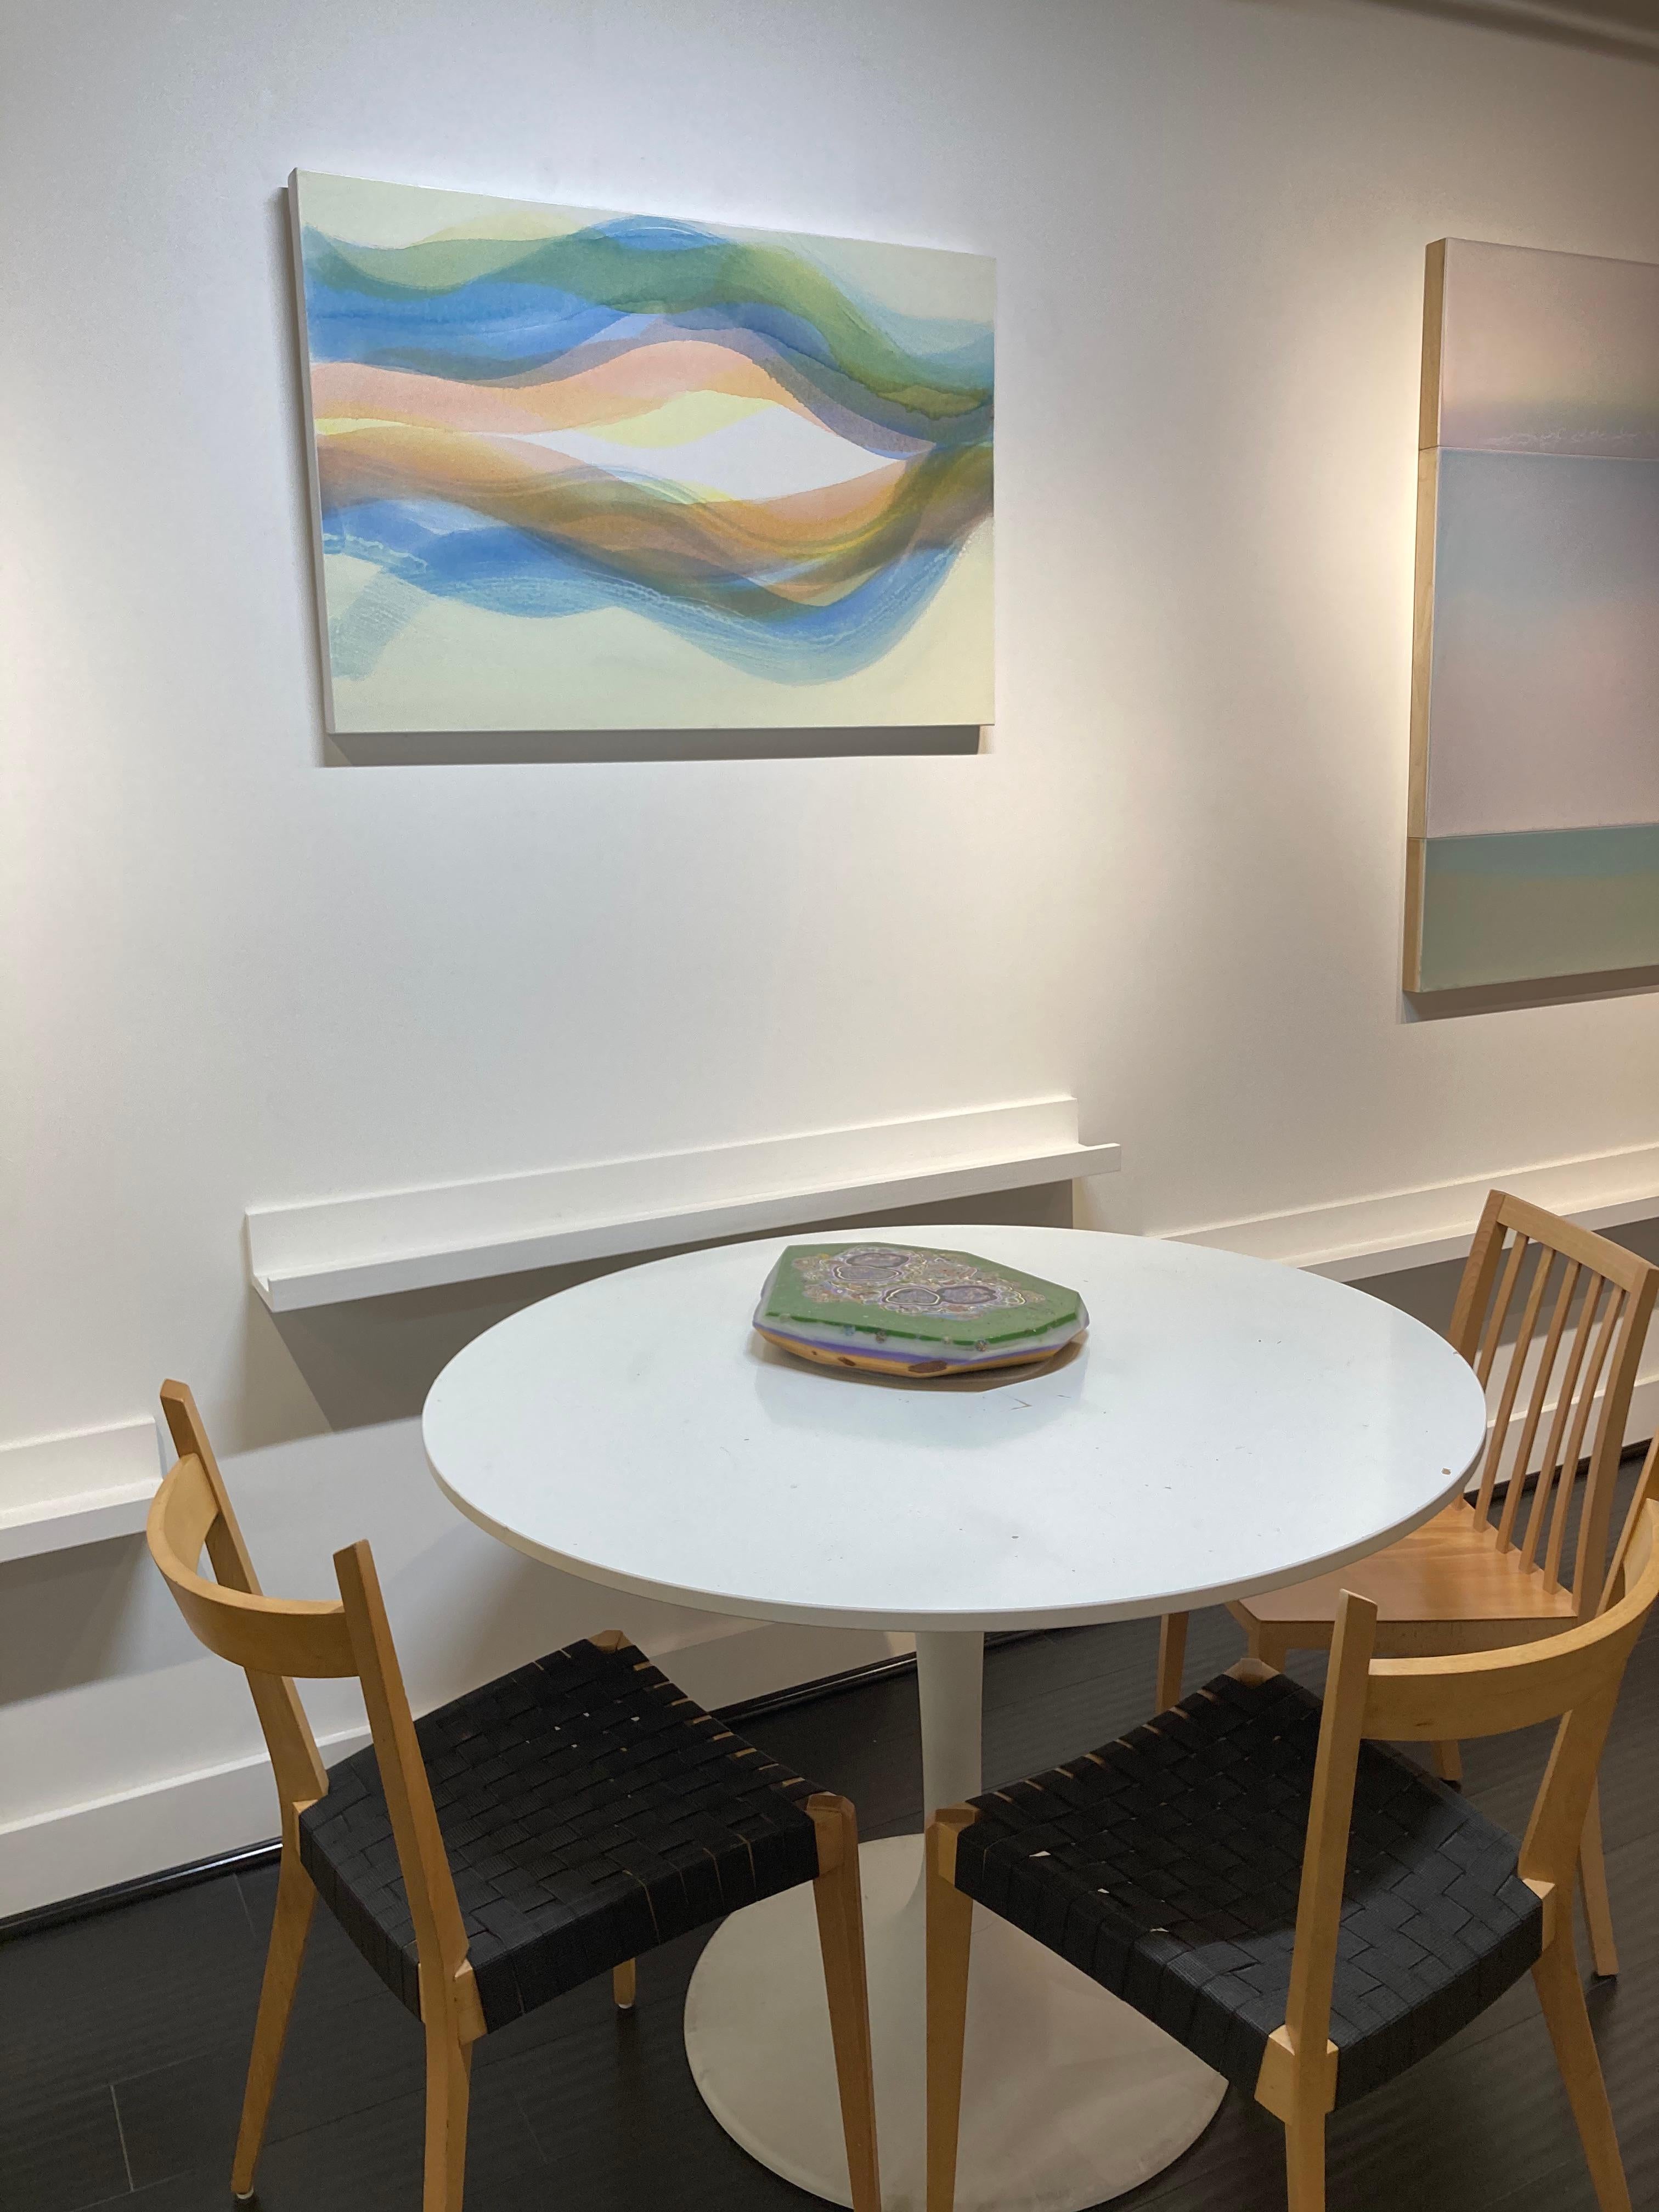 Shades of light blue, pale orange and light green are layered over a soft, luminous pale yellow and white background by Margaret Neill investigates the properties of abstract curvilinear forms found in the localized conditions of her surrounding